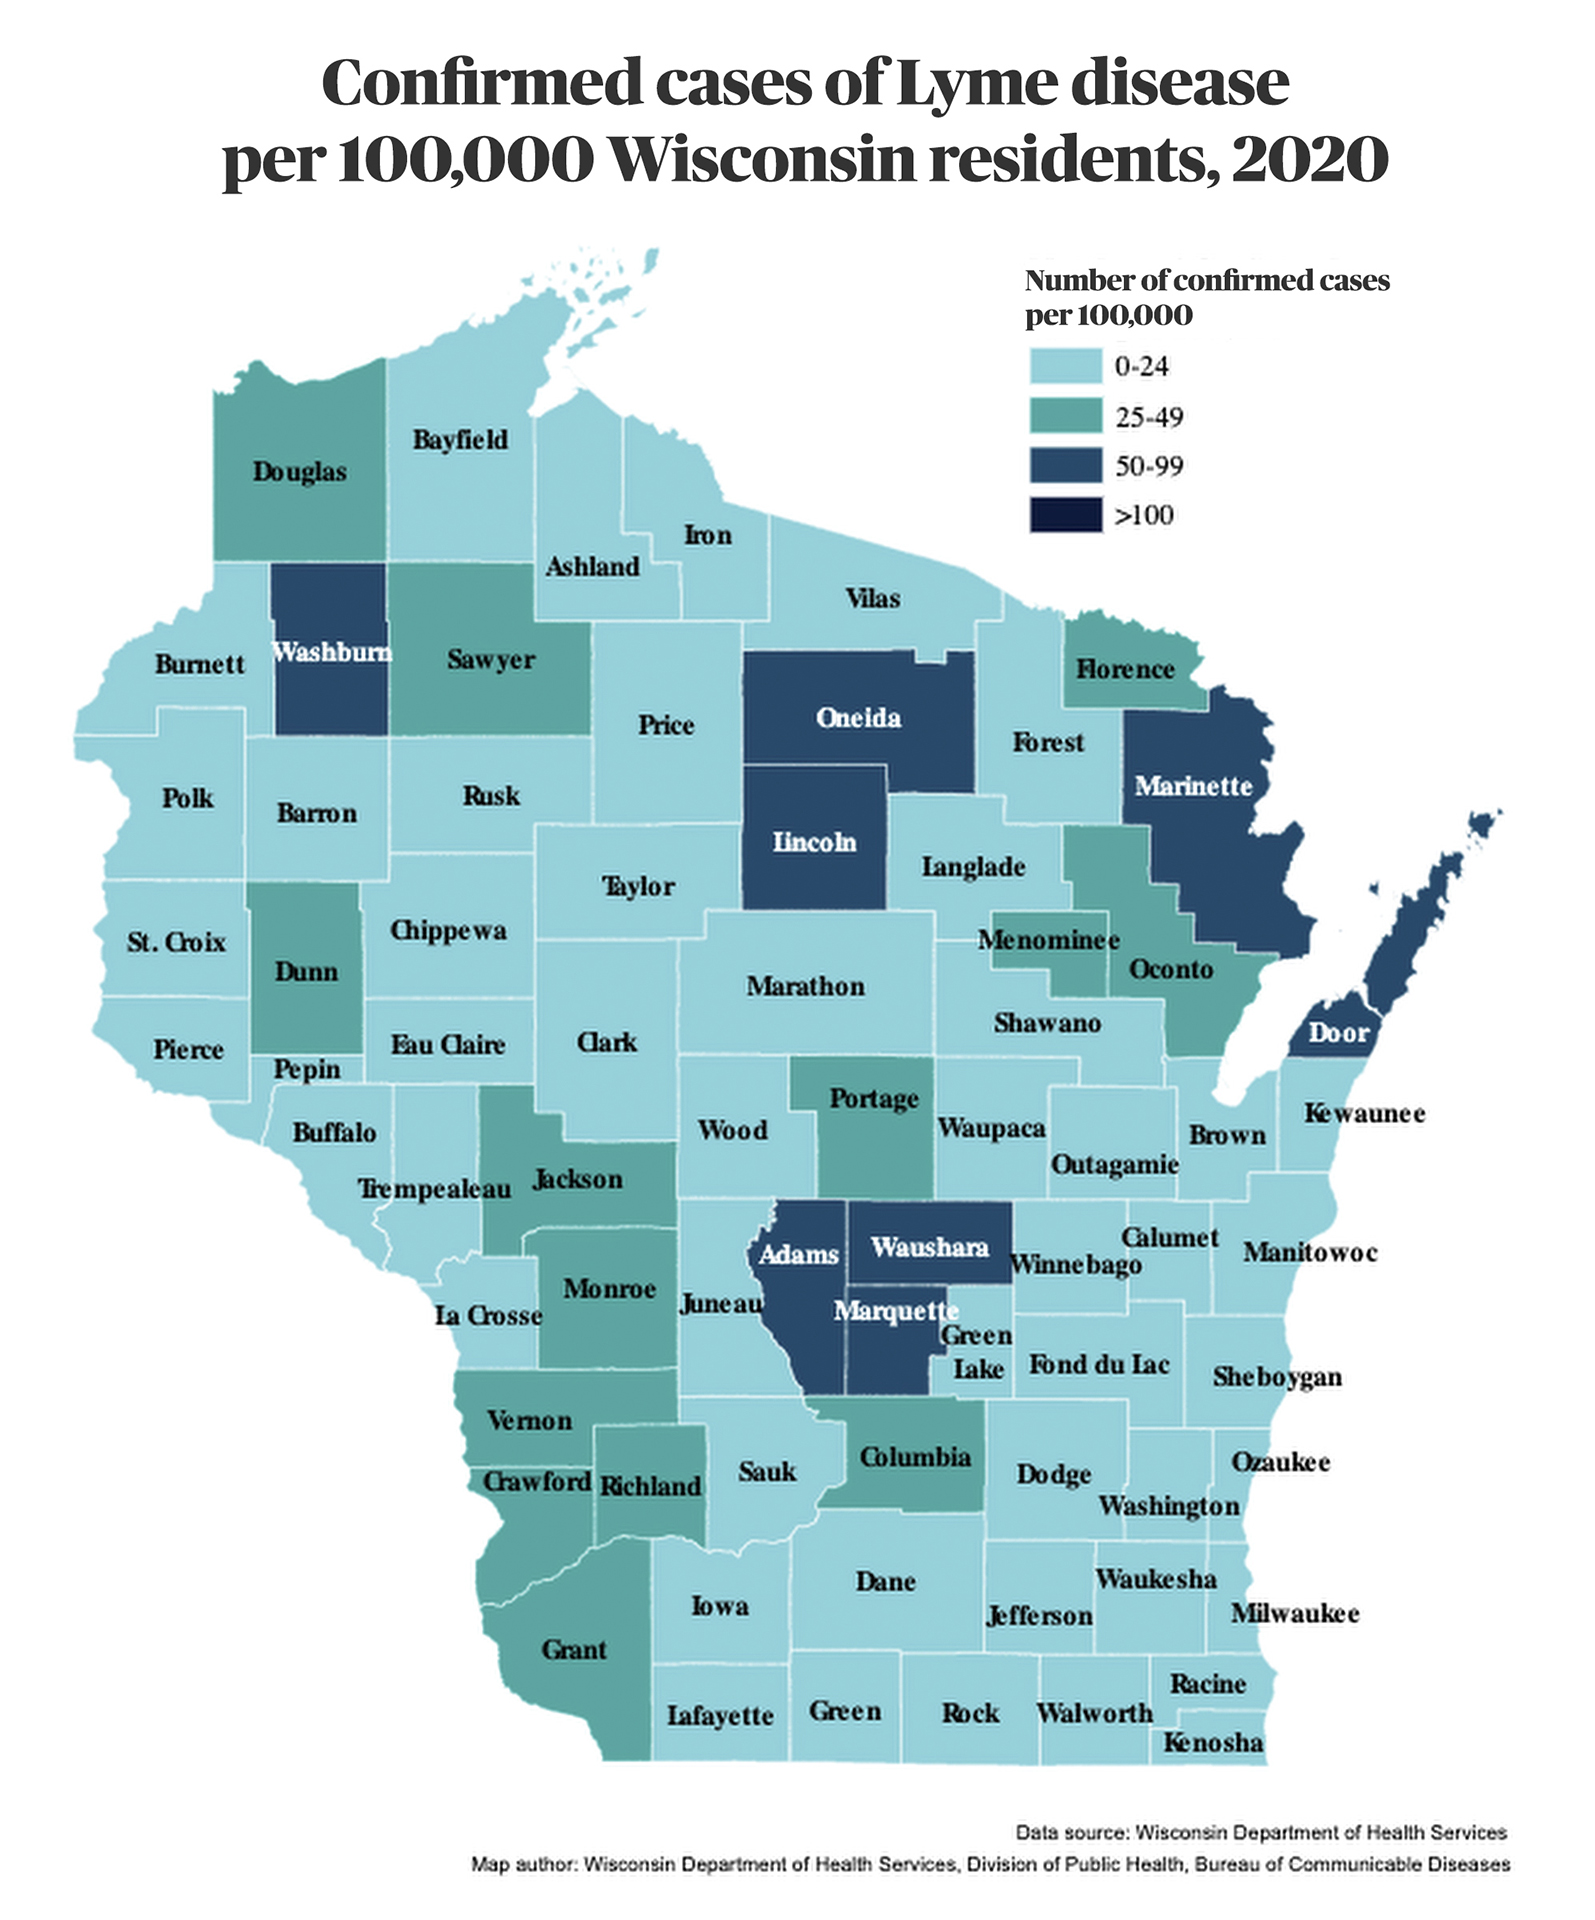 A map shows confirmed cases of Lyme disease in Wisconsin per 100,000 residents in 2020 at the county level with color coding for different rates.